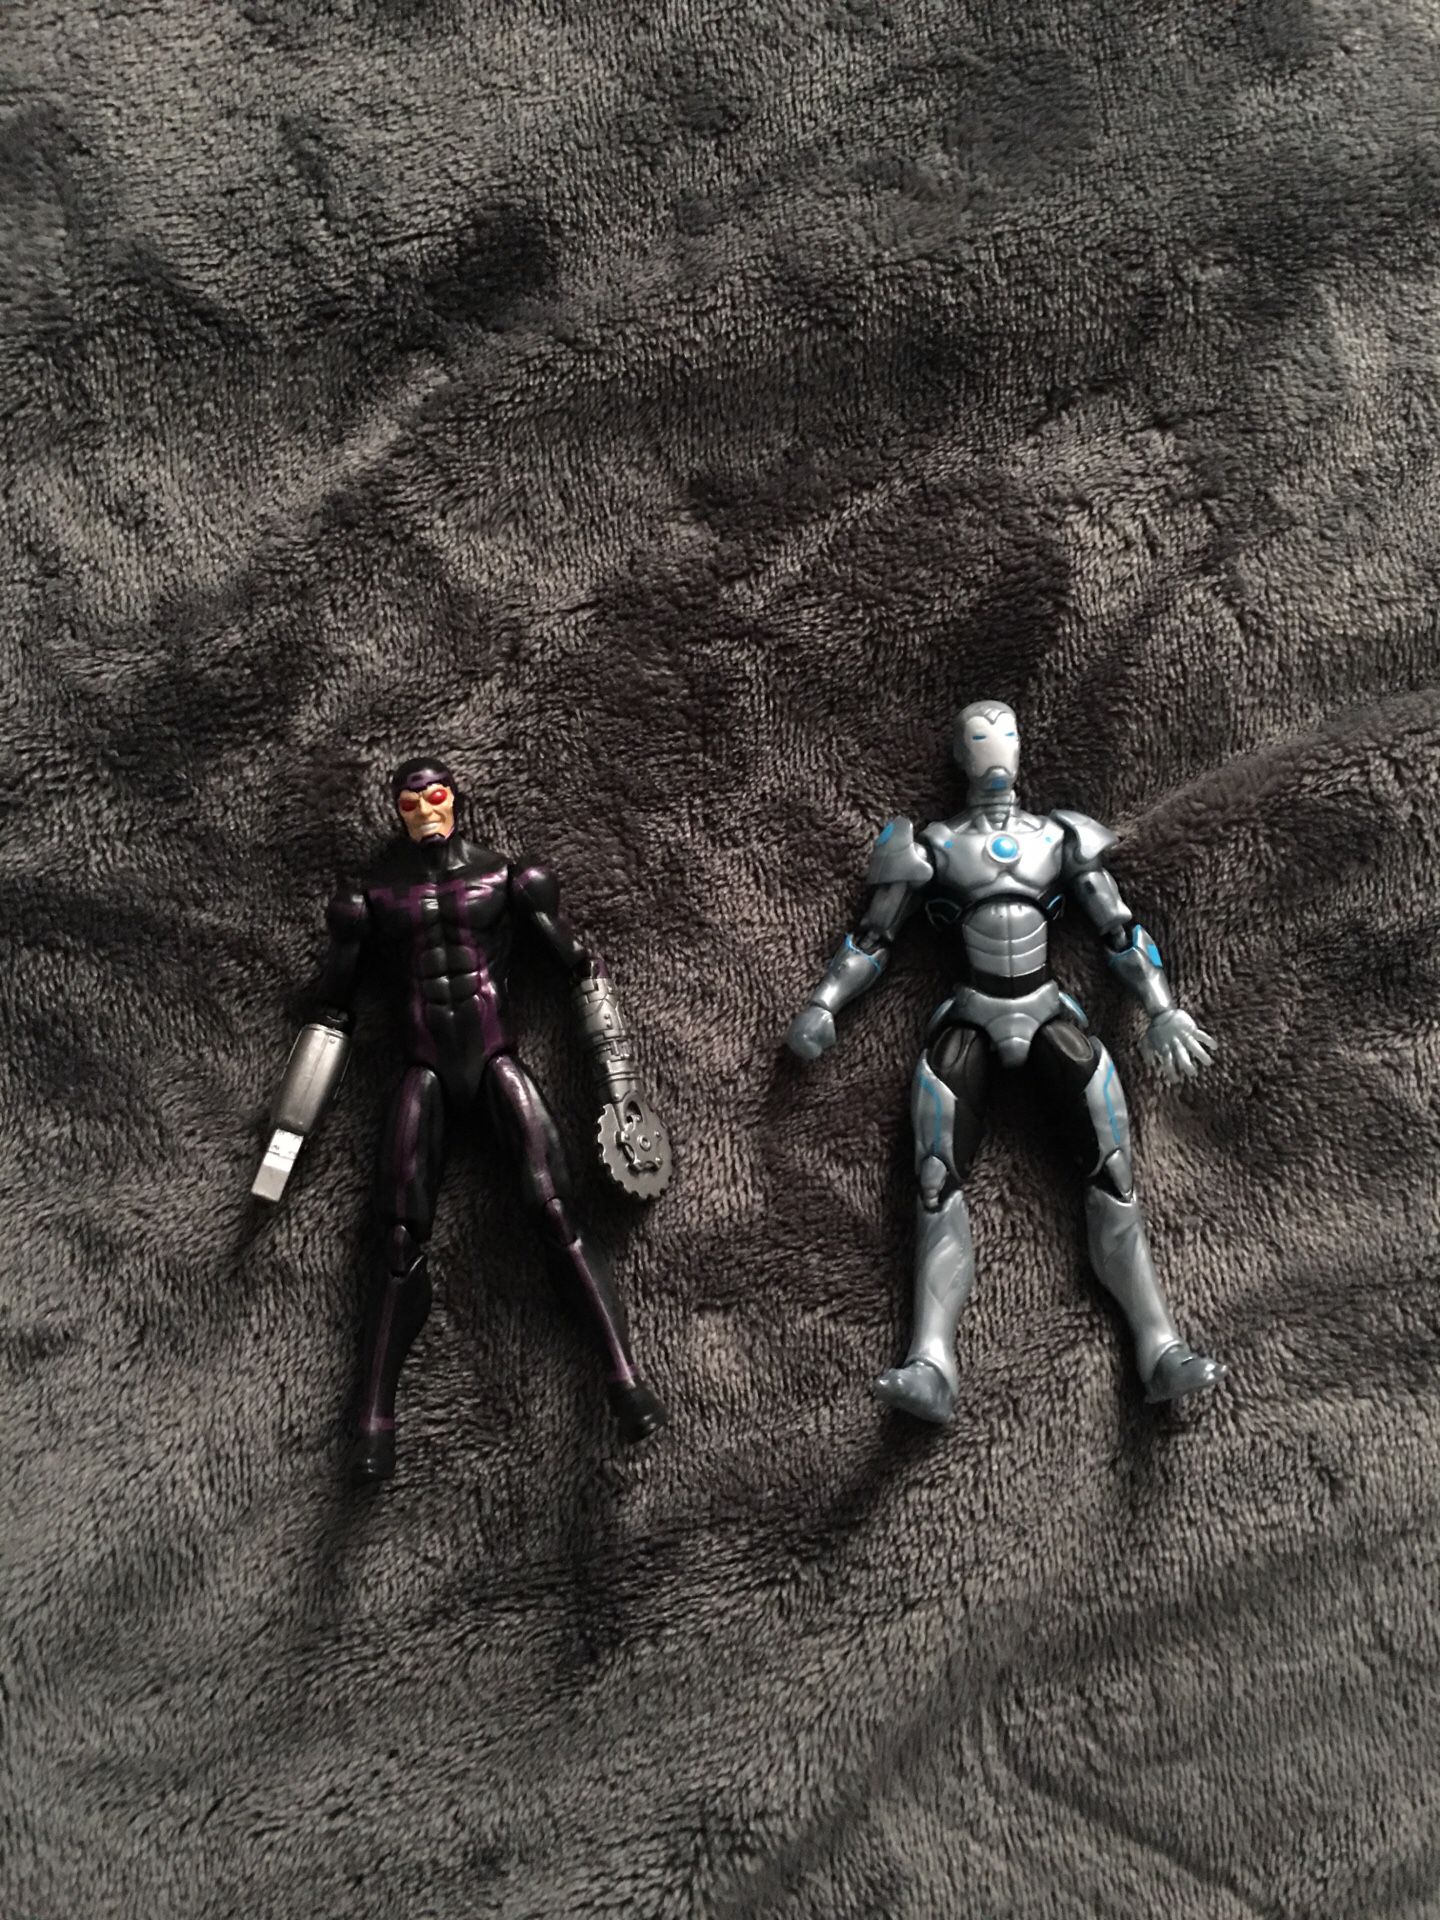 Marvel Legends 3.75 Inch Action Figure Comic 2-Pack (2016 Wave 1) - Mechanical Masters (Machine Man and Superior Iron Man) Marvel Legends 3.75 Inch